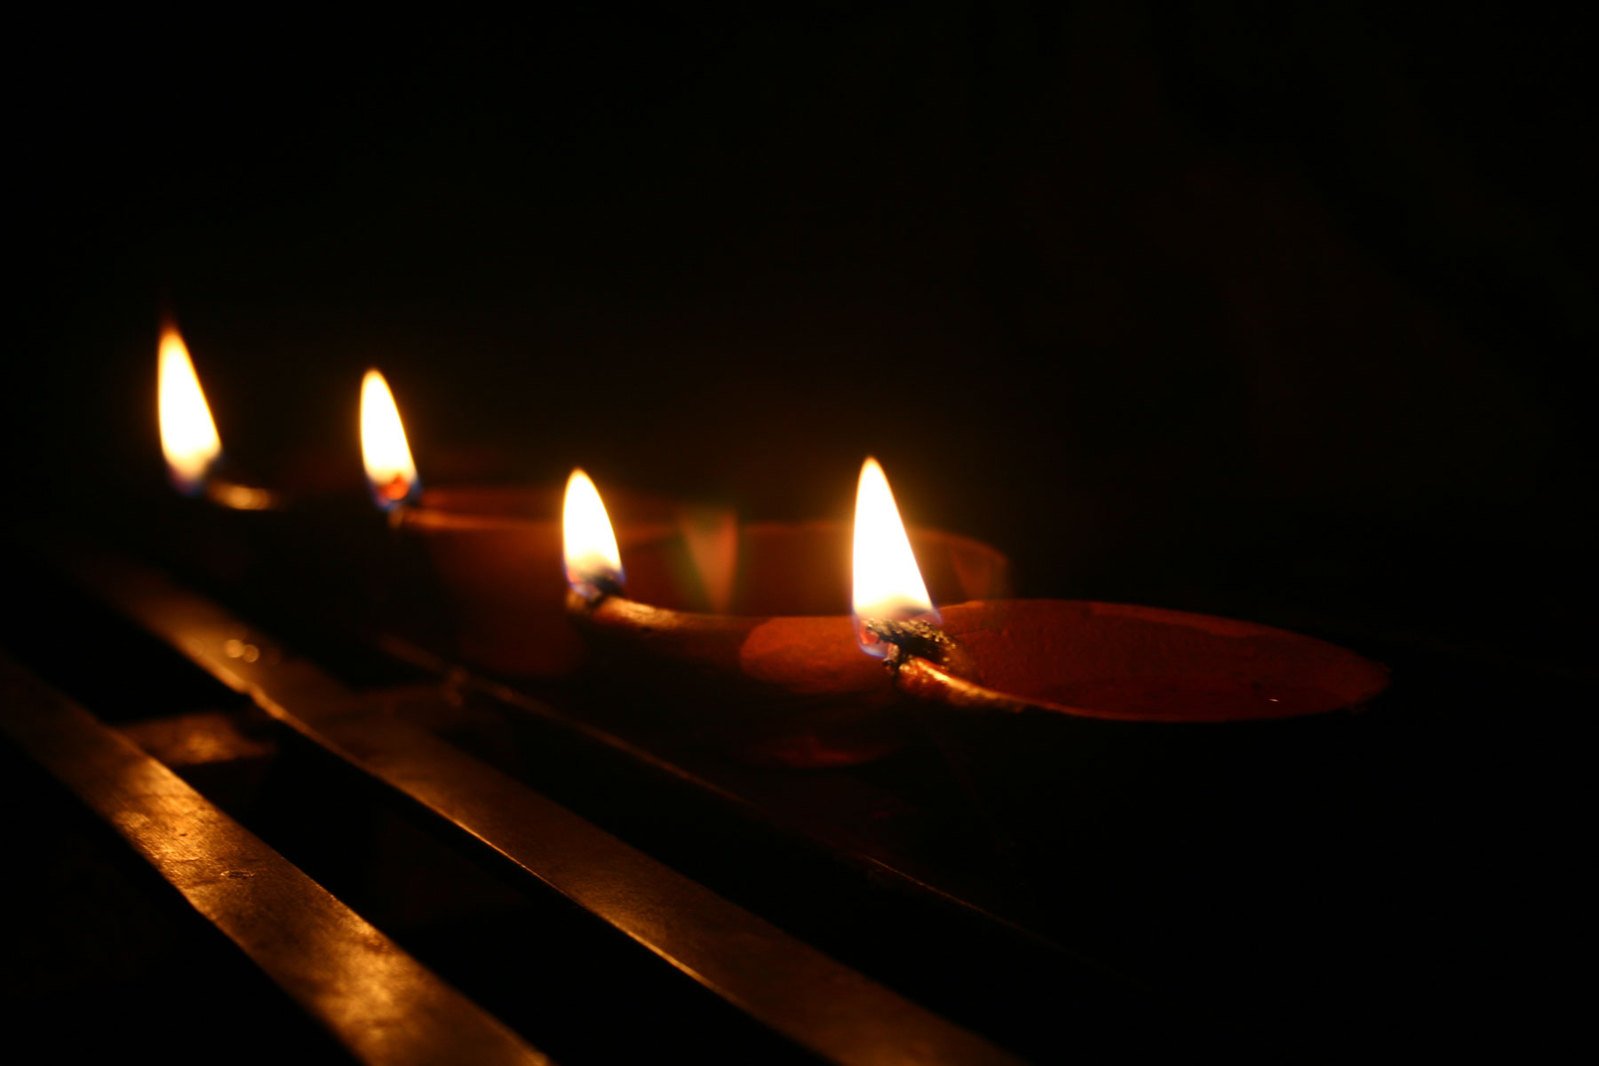 four candles light up on a table in the dark